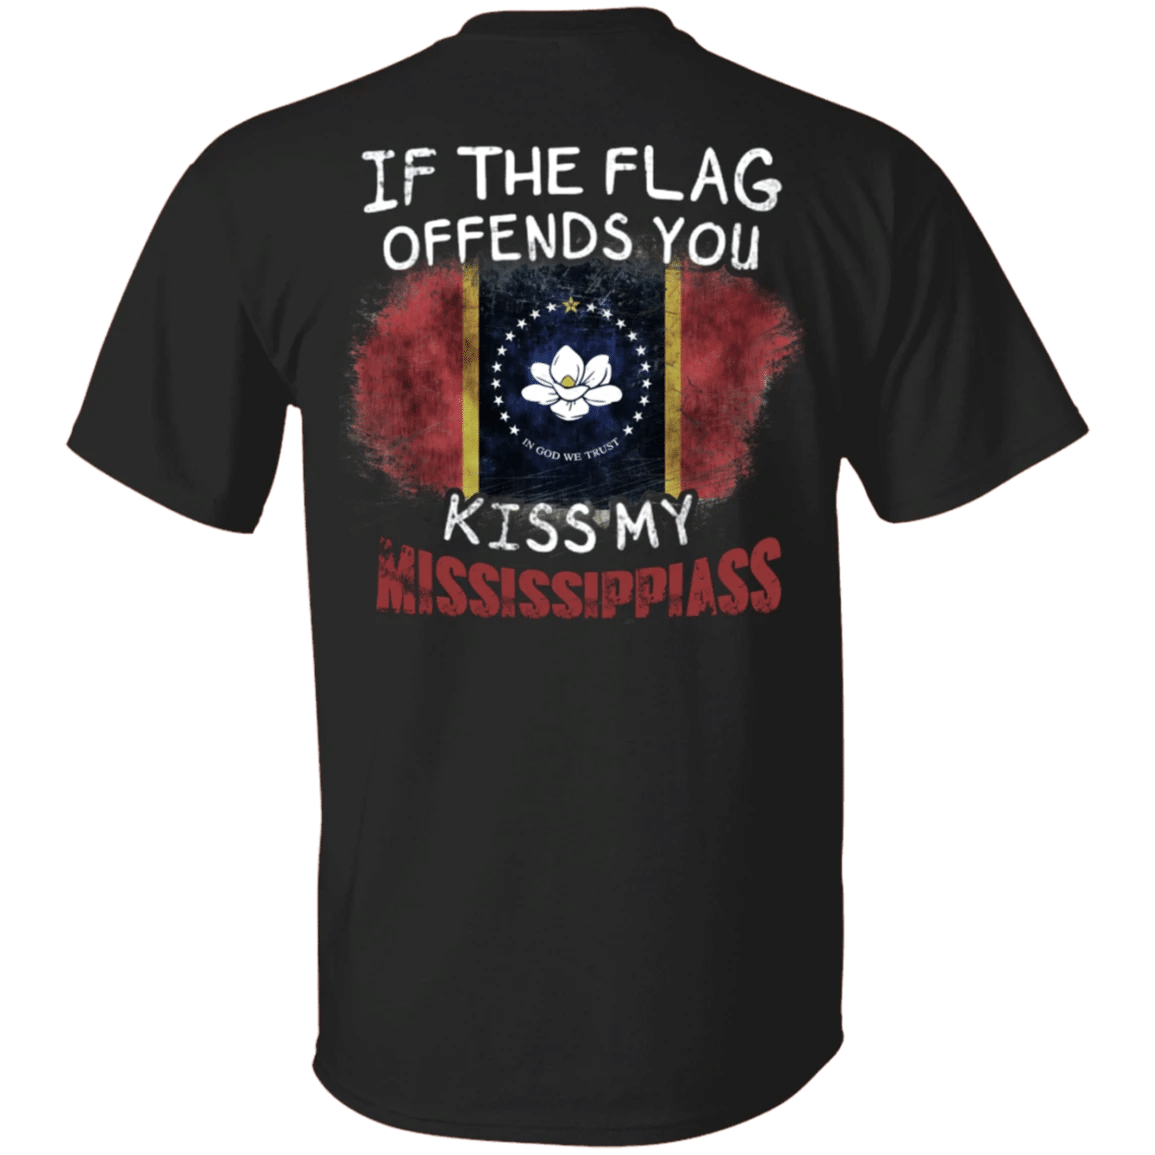 If The Flag Offends You Kiss My Missipissiass T-Shirt Patriotic New Mississippi Shirt Humor